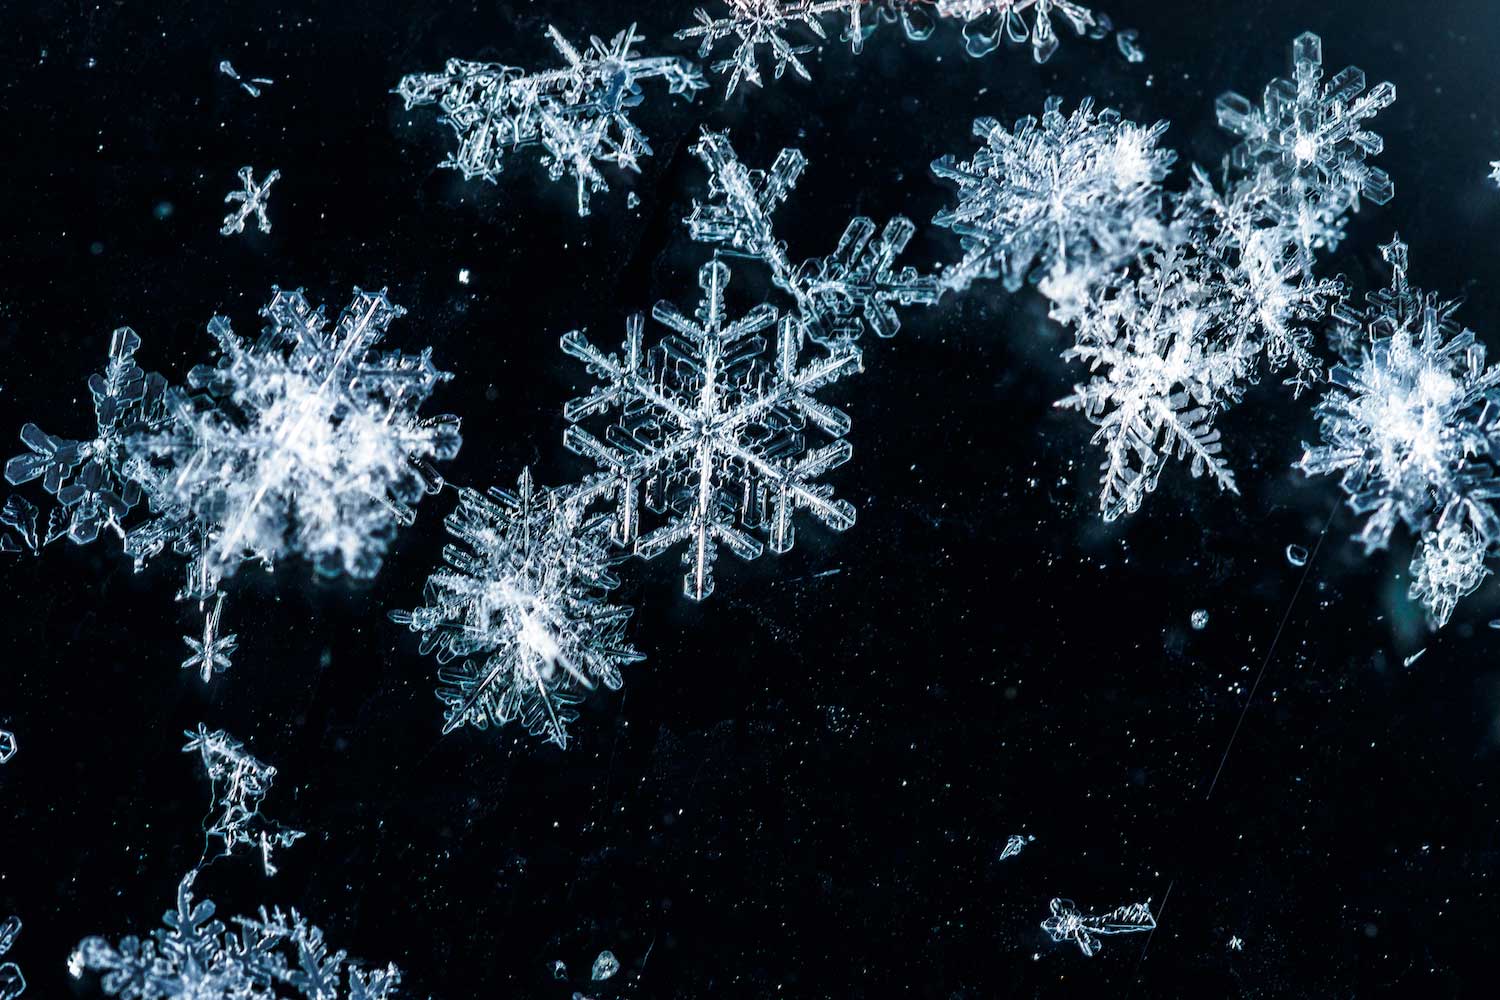 Is it true that no two snowflakes are identical?  Office for Science and  Society - McGill University